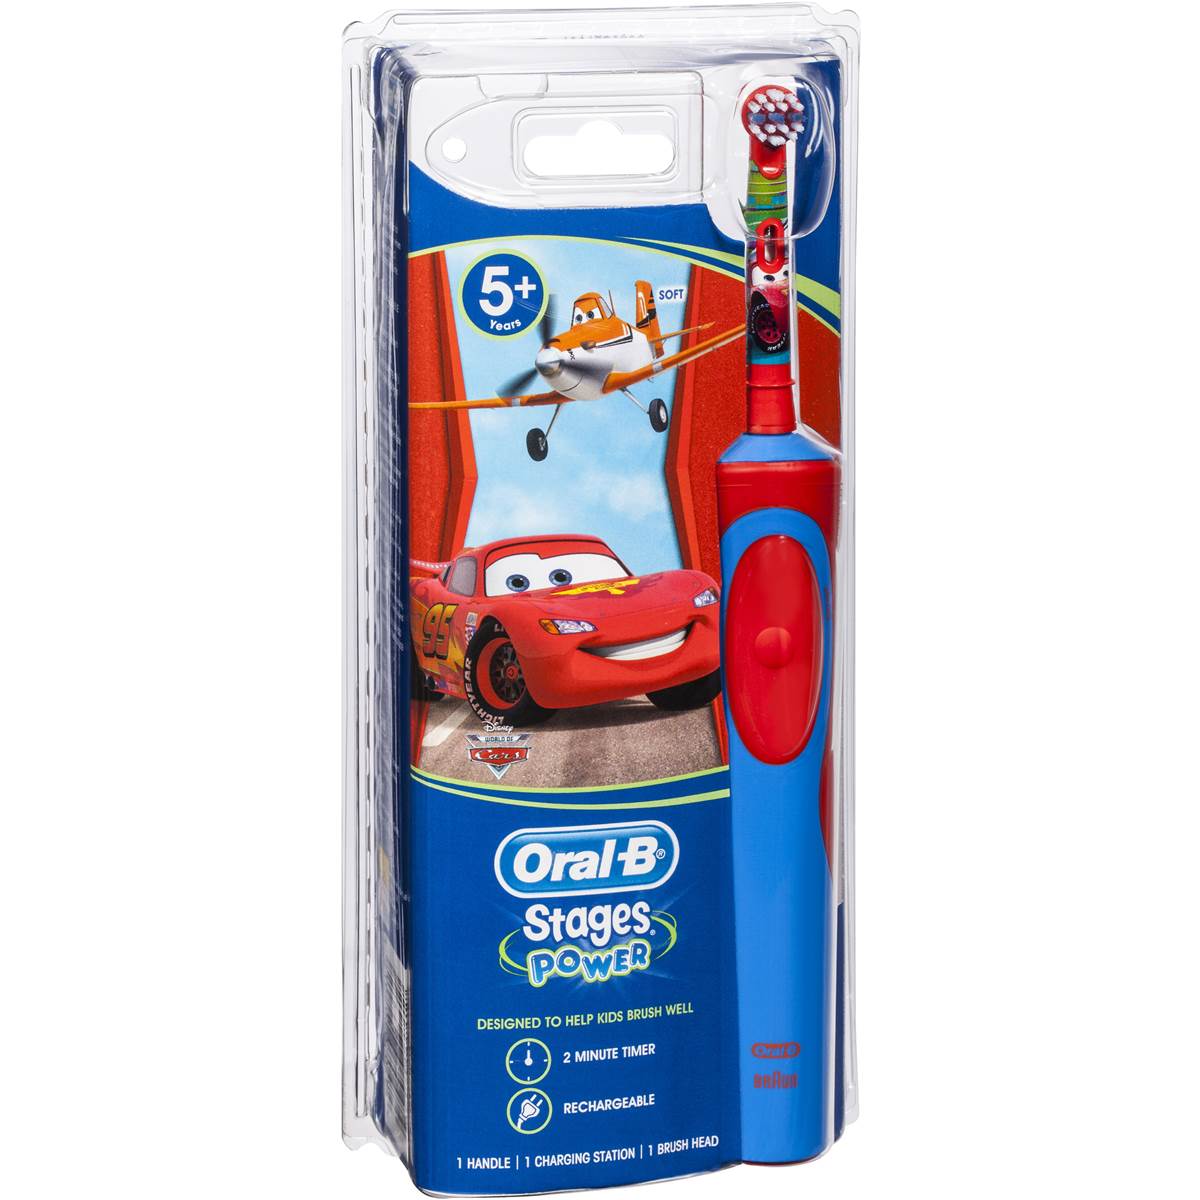 Oral-b Stages Powered Toothbrush 5+years Disney Soft